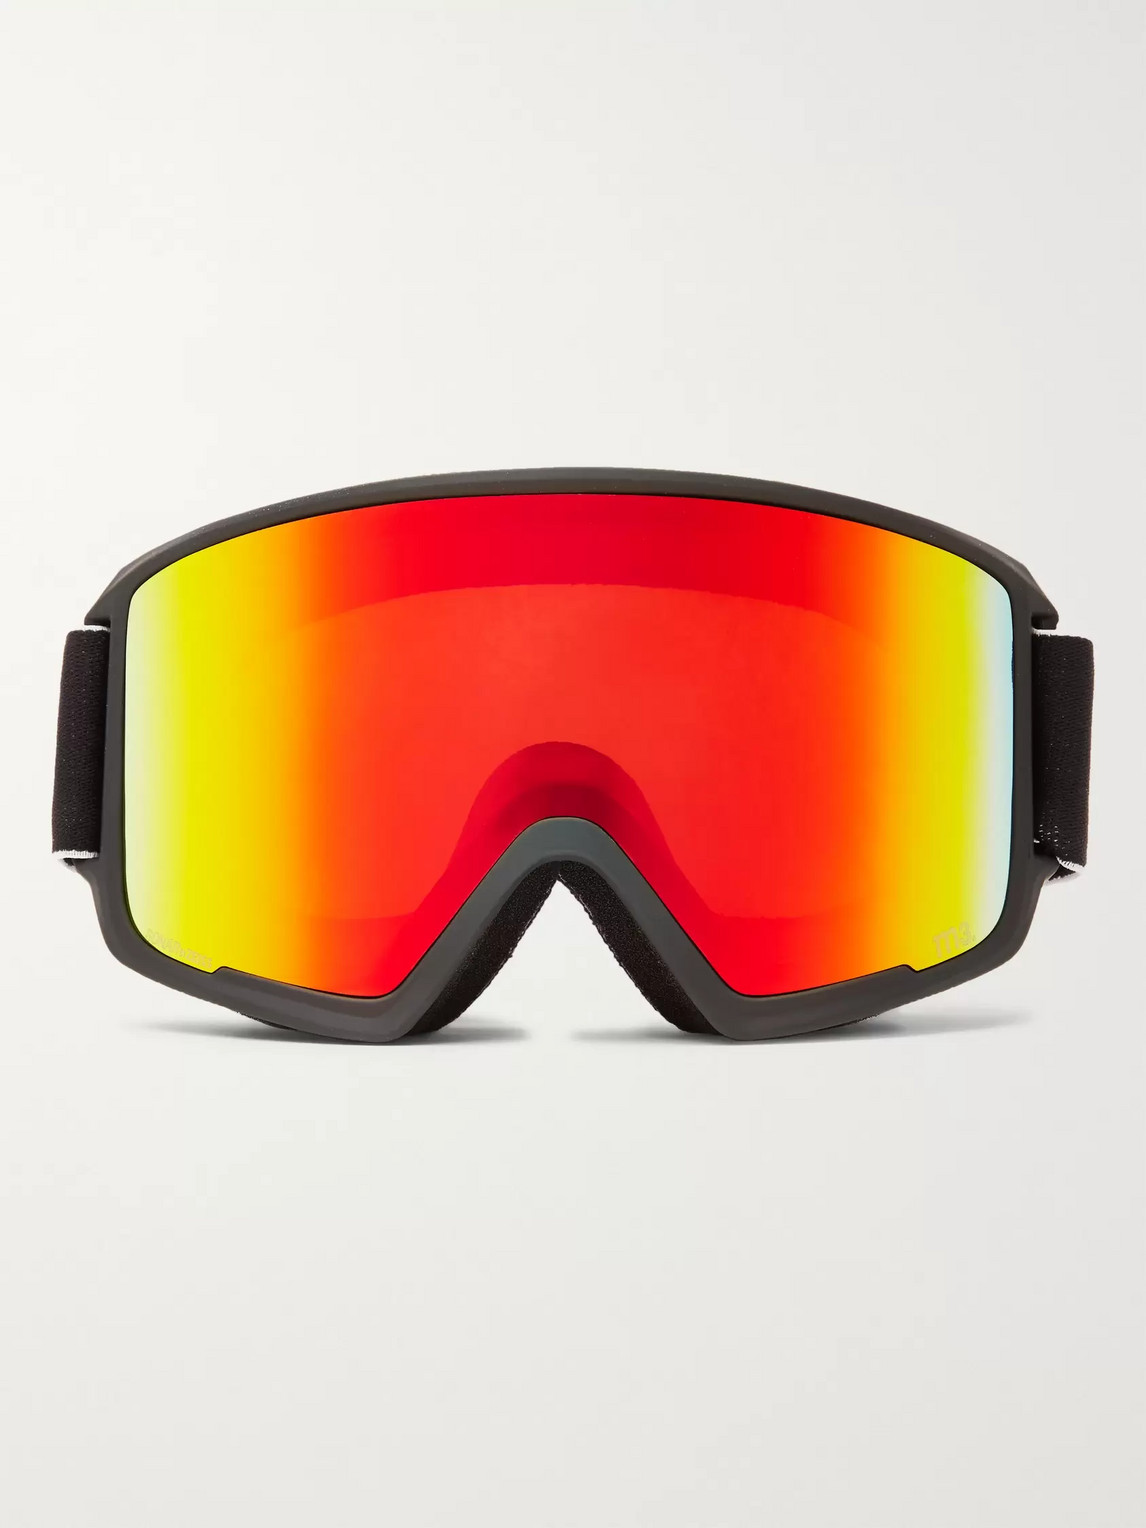 Anon M3 Ski Goggles And Stretch-jersey Face Mask In Orange